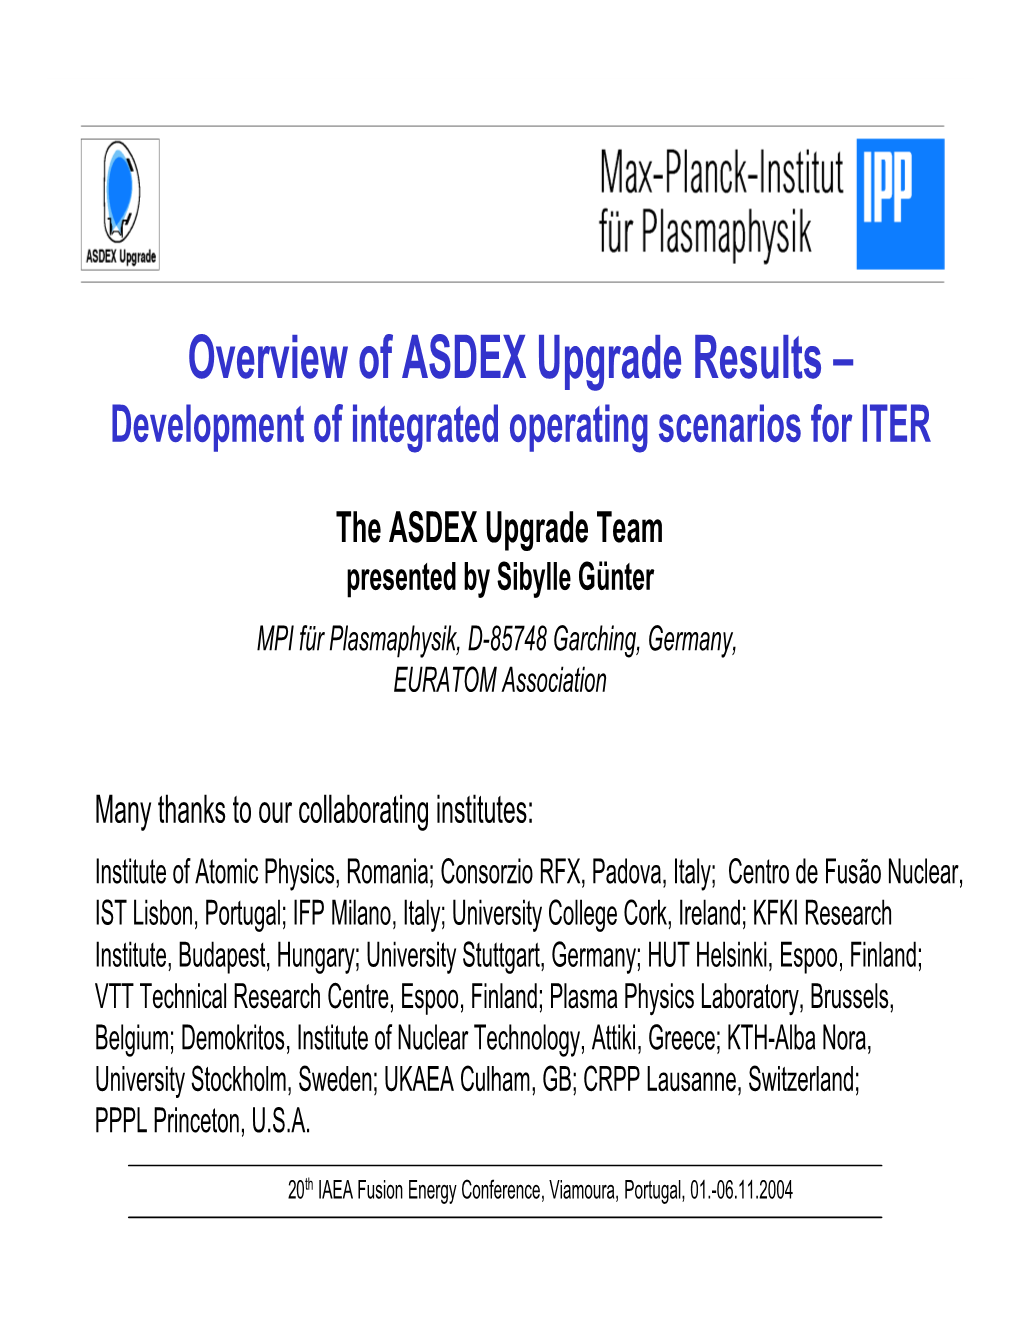 Overview of ASDEX Upgrade Results – Development of Integrated Operating Scenarios for ITER